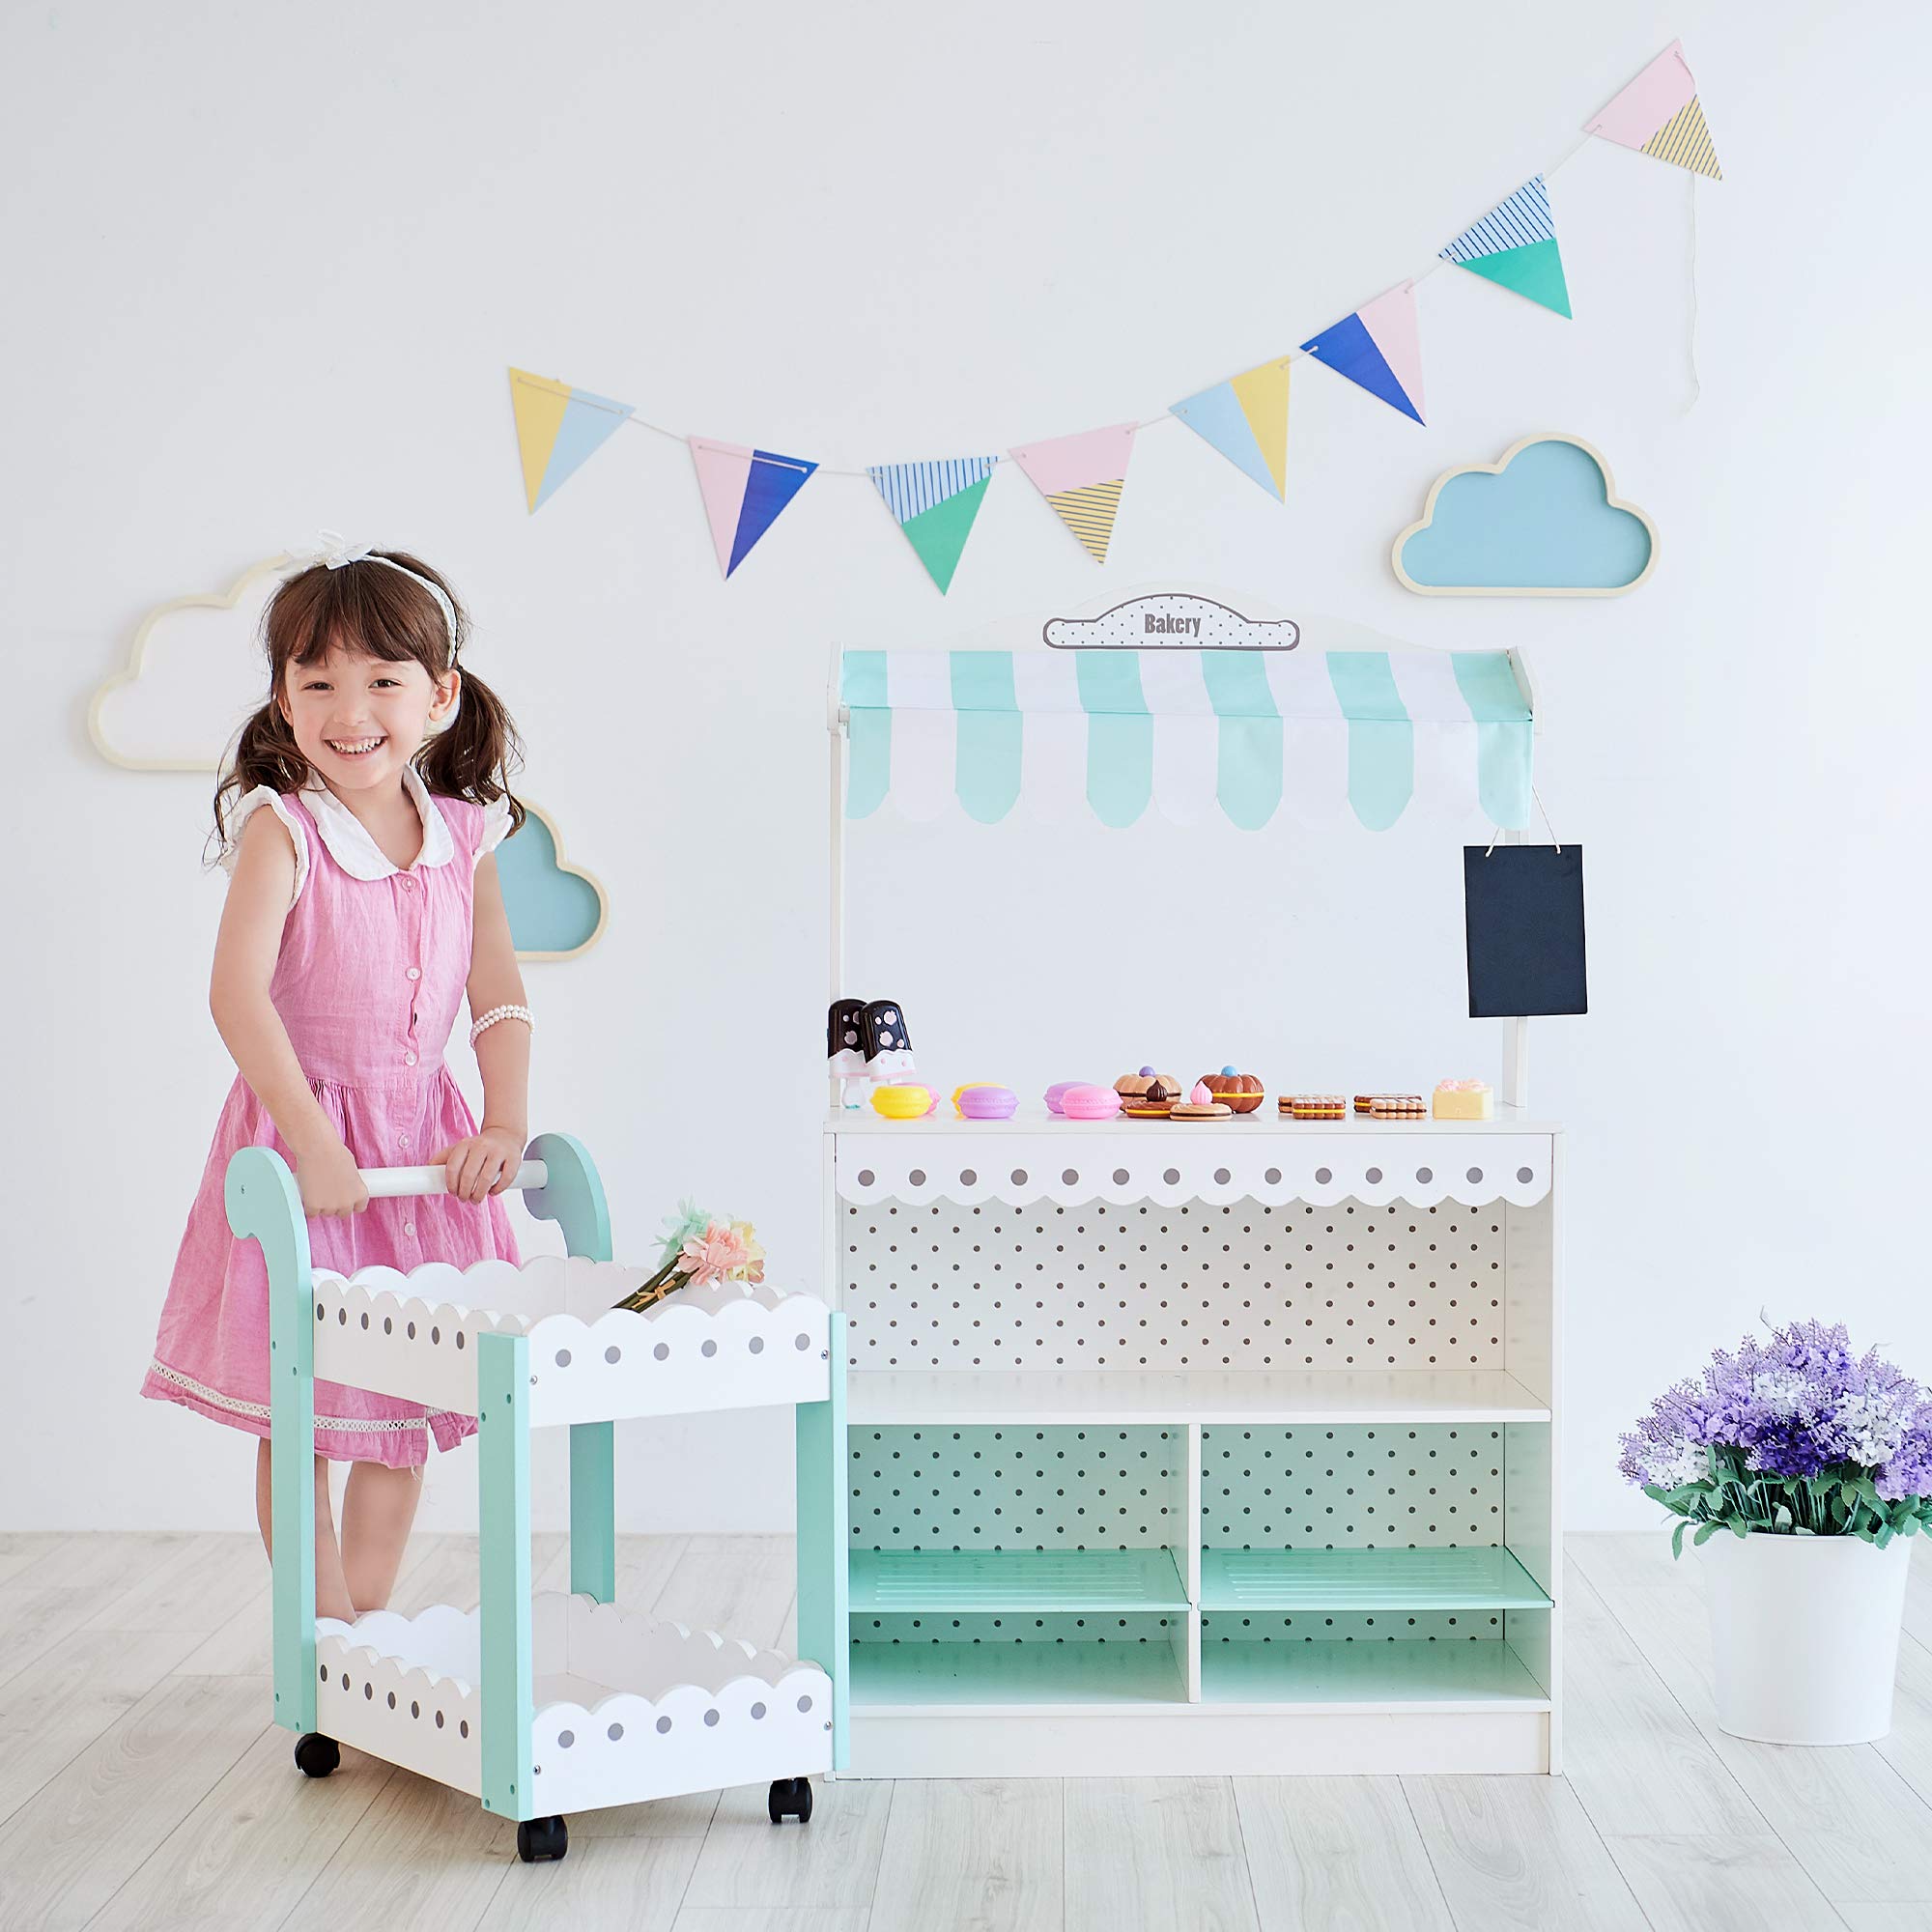 Teamson Kids Wooden Dessert Stand and Rolling Cart, Snacks and Sweets Food Cart, Kids Play Shop Play Food, Pretend Play Bakery Play Stand with 18 Accessories For Kids, Preschoolers Ages 3+, White/Blue